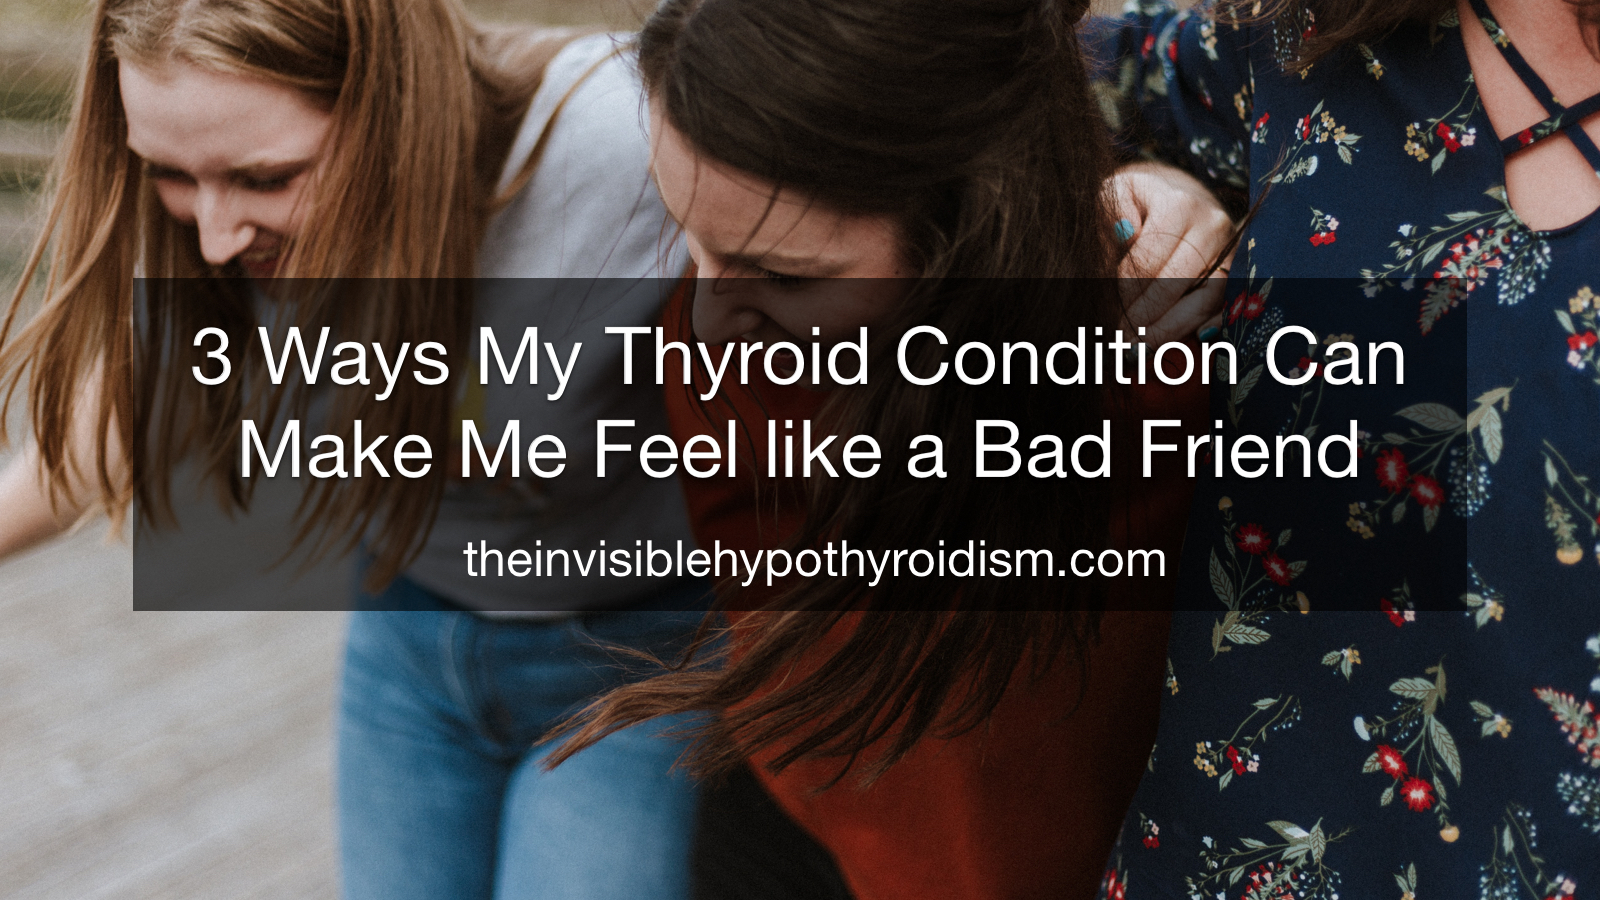 3 Ways My Thyroid Condition Can Make Me Feel like a Bad Friend